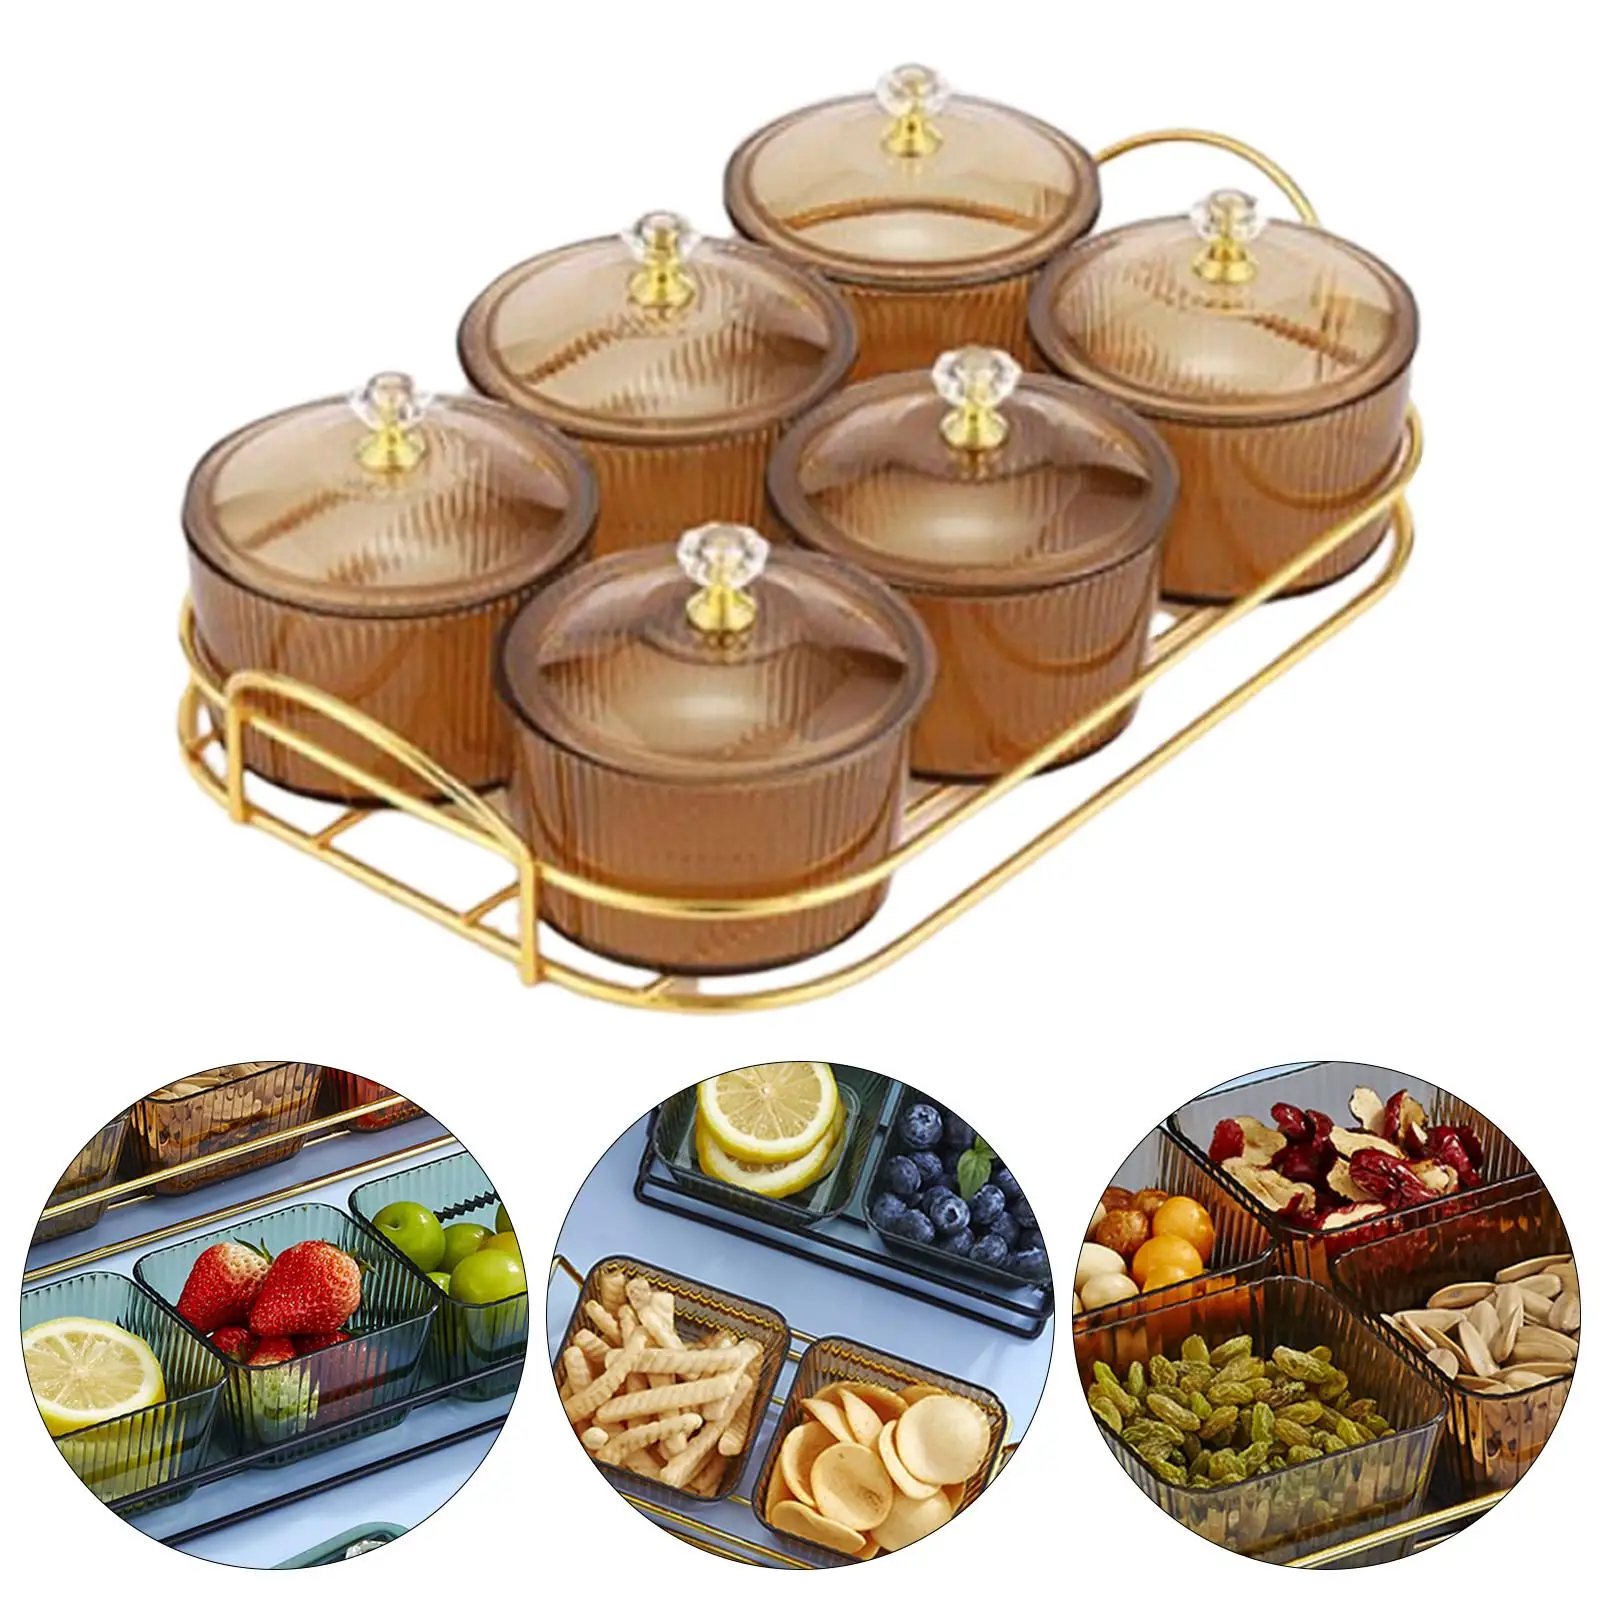 Candy and Nut Serving Container Appetizer Tray and 6 Bowls Fruit Snacks Serving Platter for Appetizer Caddy Nuts